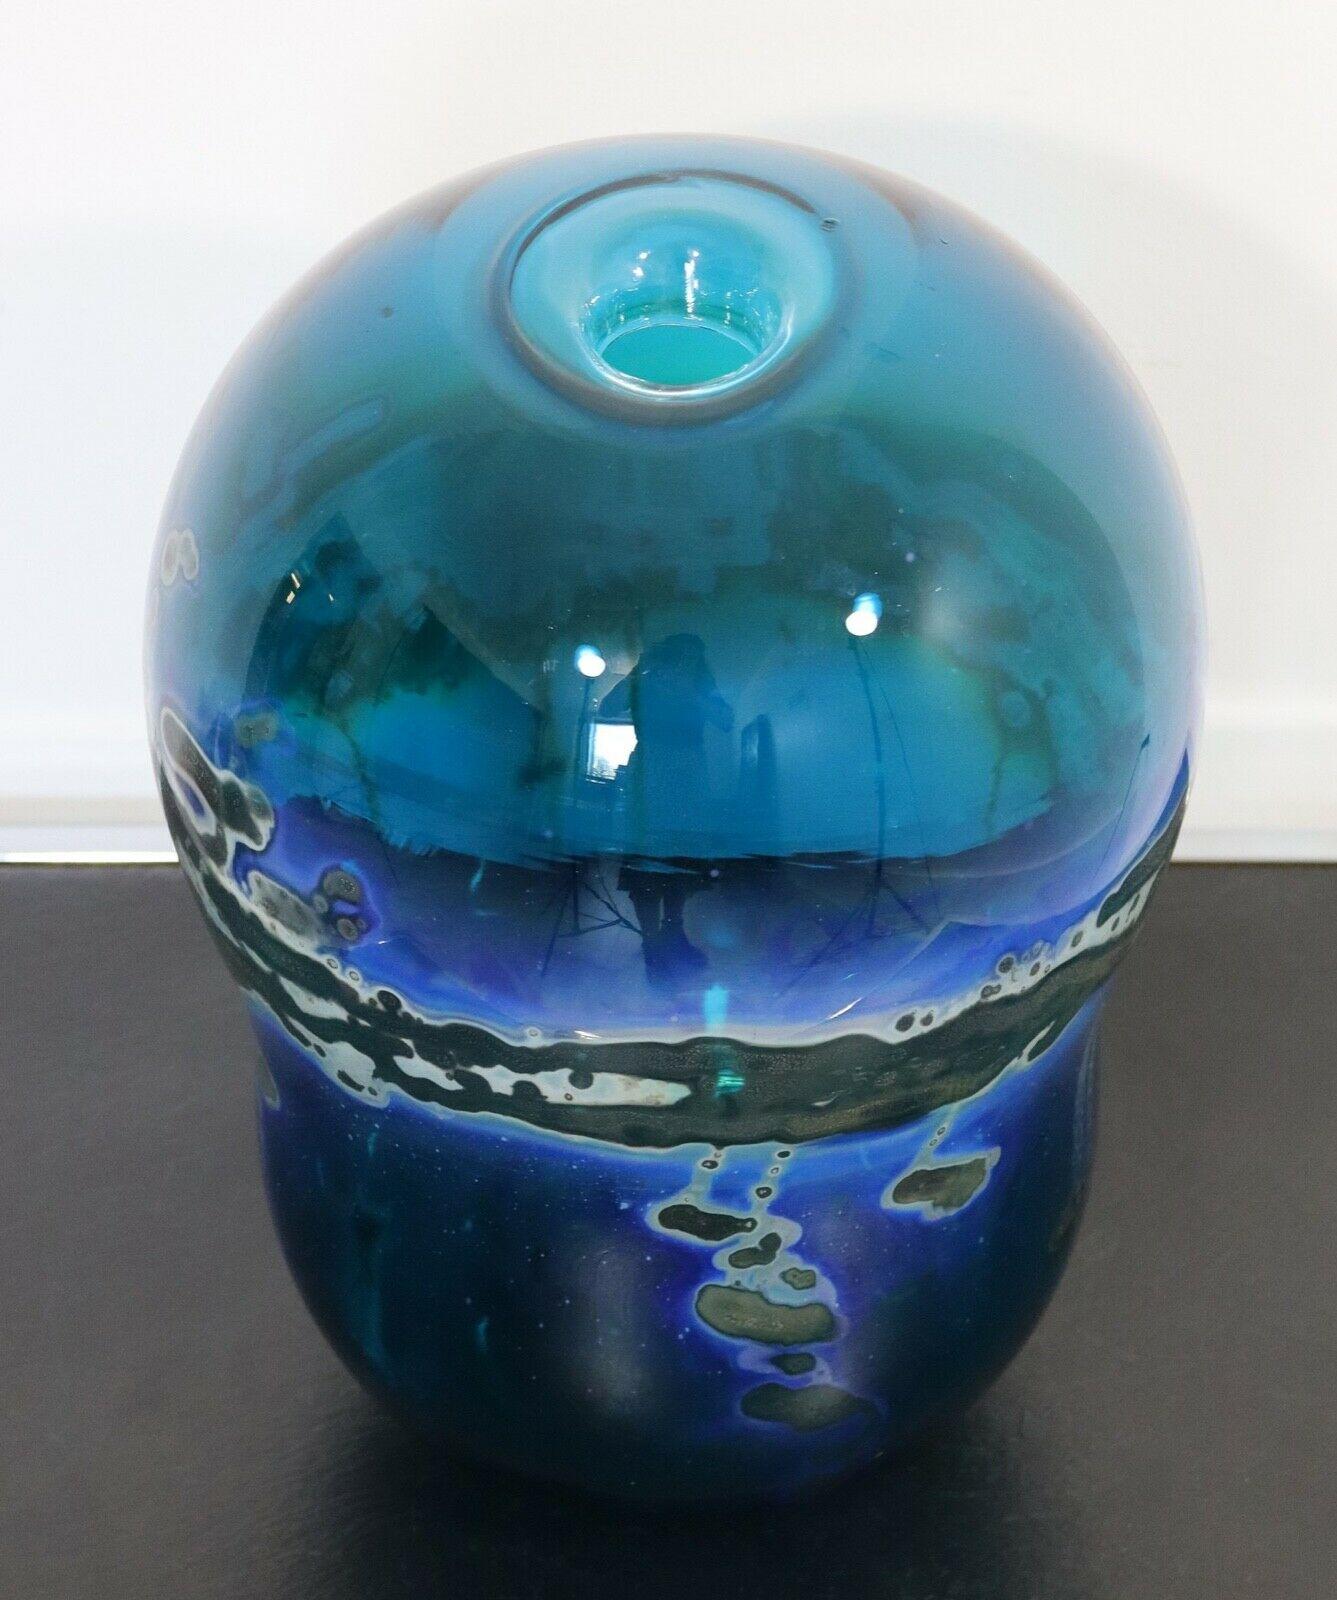 For your consideration is a stunning blue hand blown glass vase with swirl designs, signed by Kent Ipsen (14x10). This is from the private collection of John Loree, who was a beloved and inspirational ceramics professor at Eastern Michigan